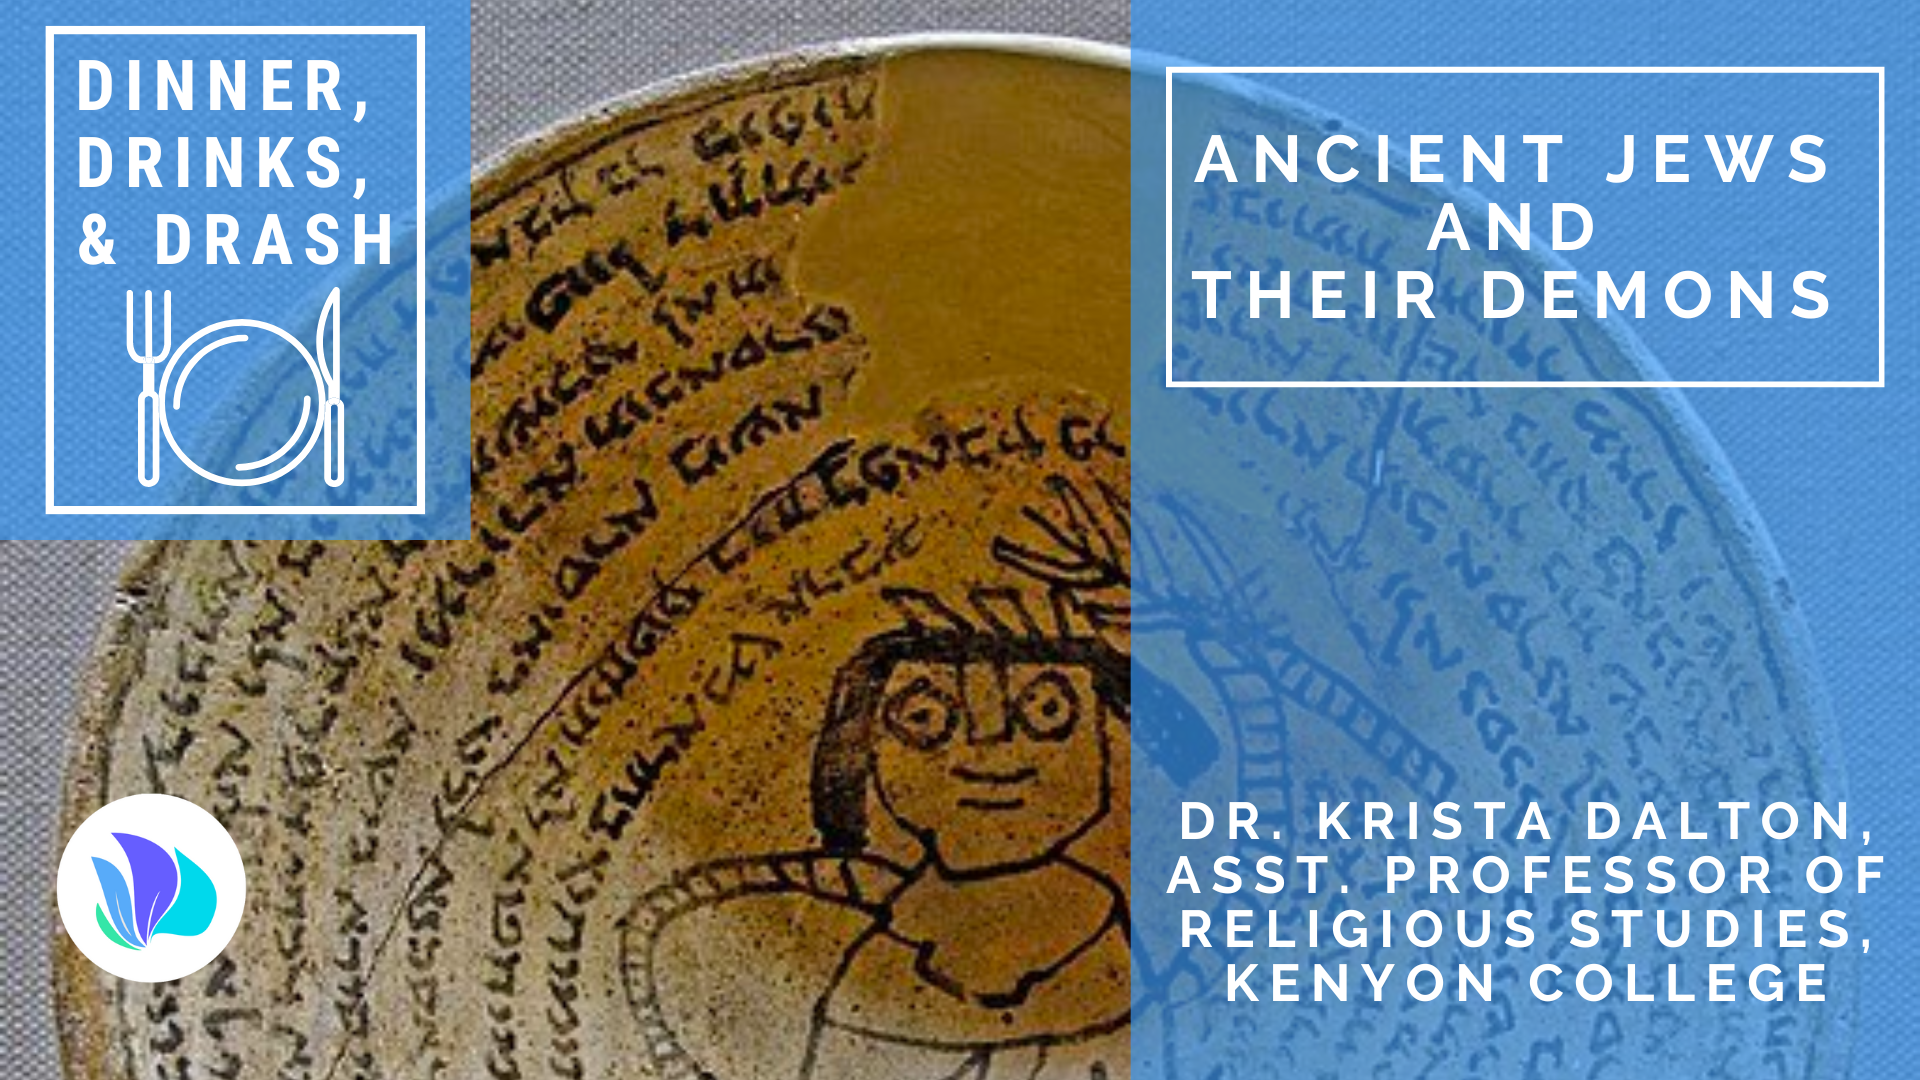 Dinner, Drinks, & Drash: Ancient Jews and Their Demons with Dr. Krista Dalton, Asst. Professor of Religious Studies, Kenyon College